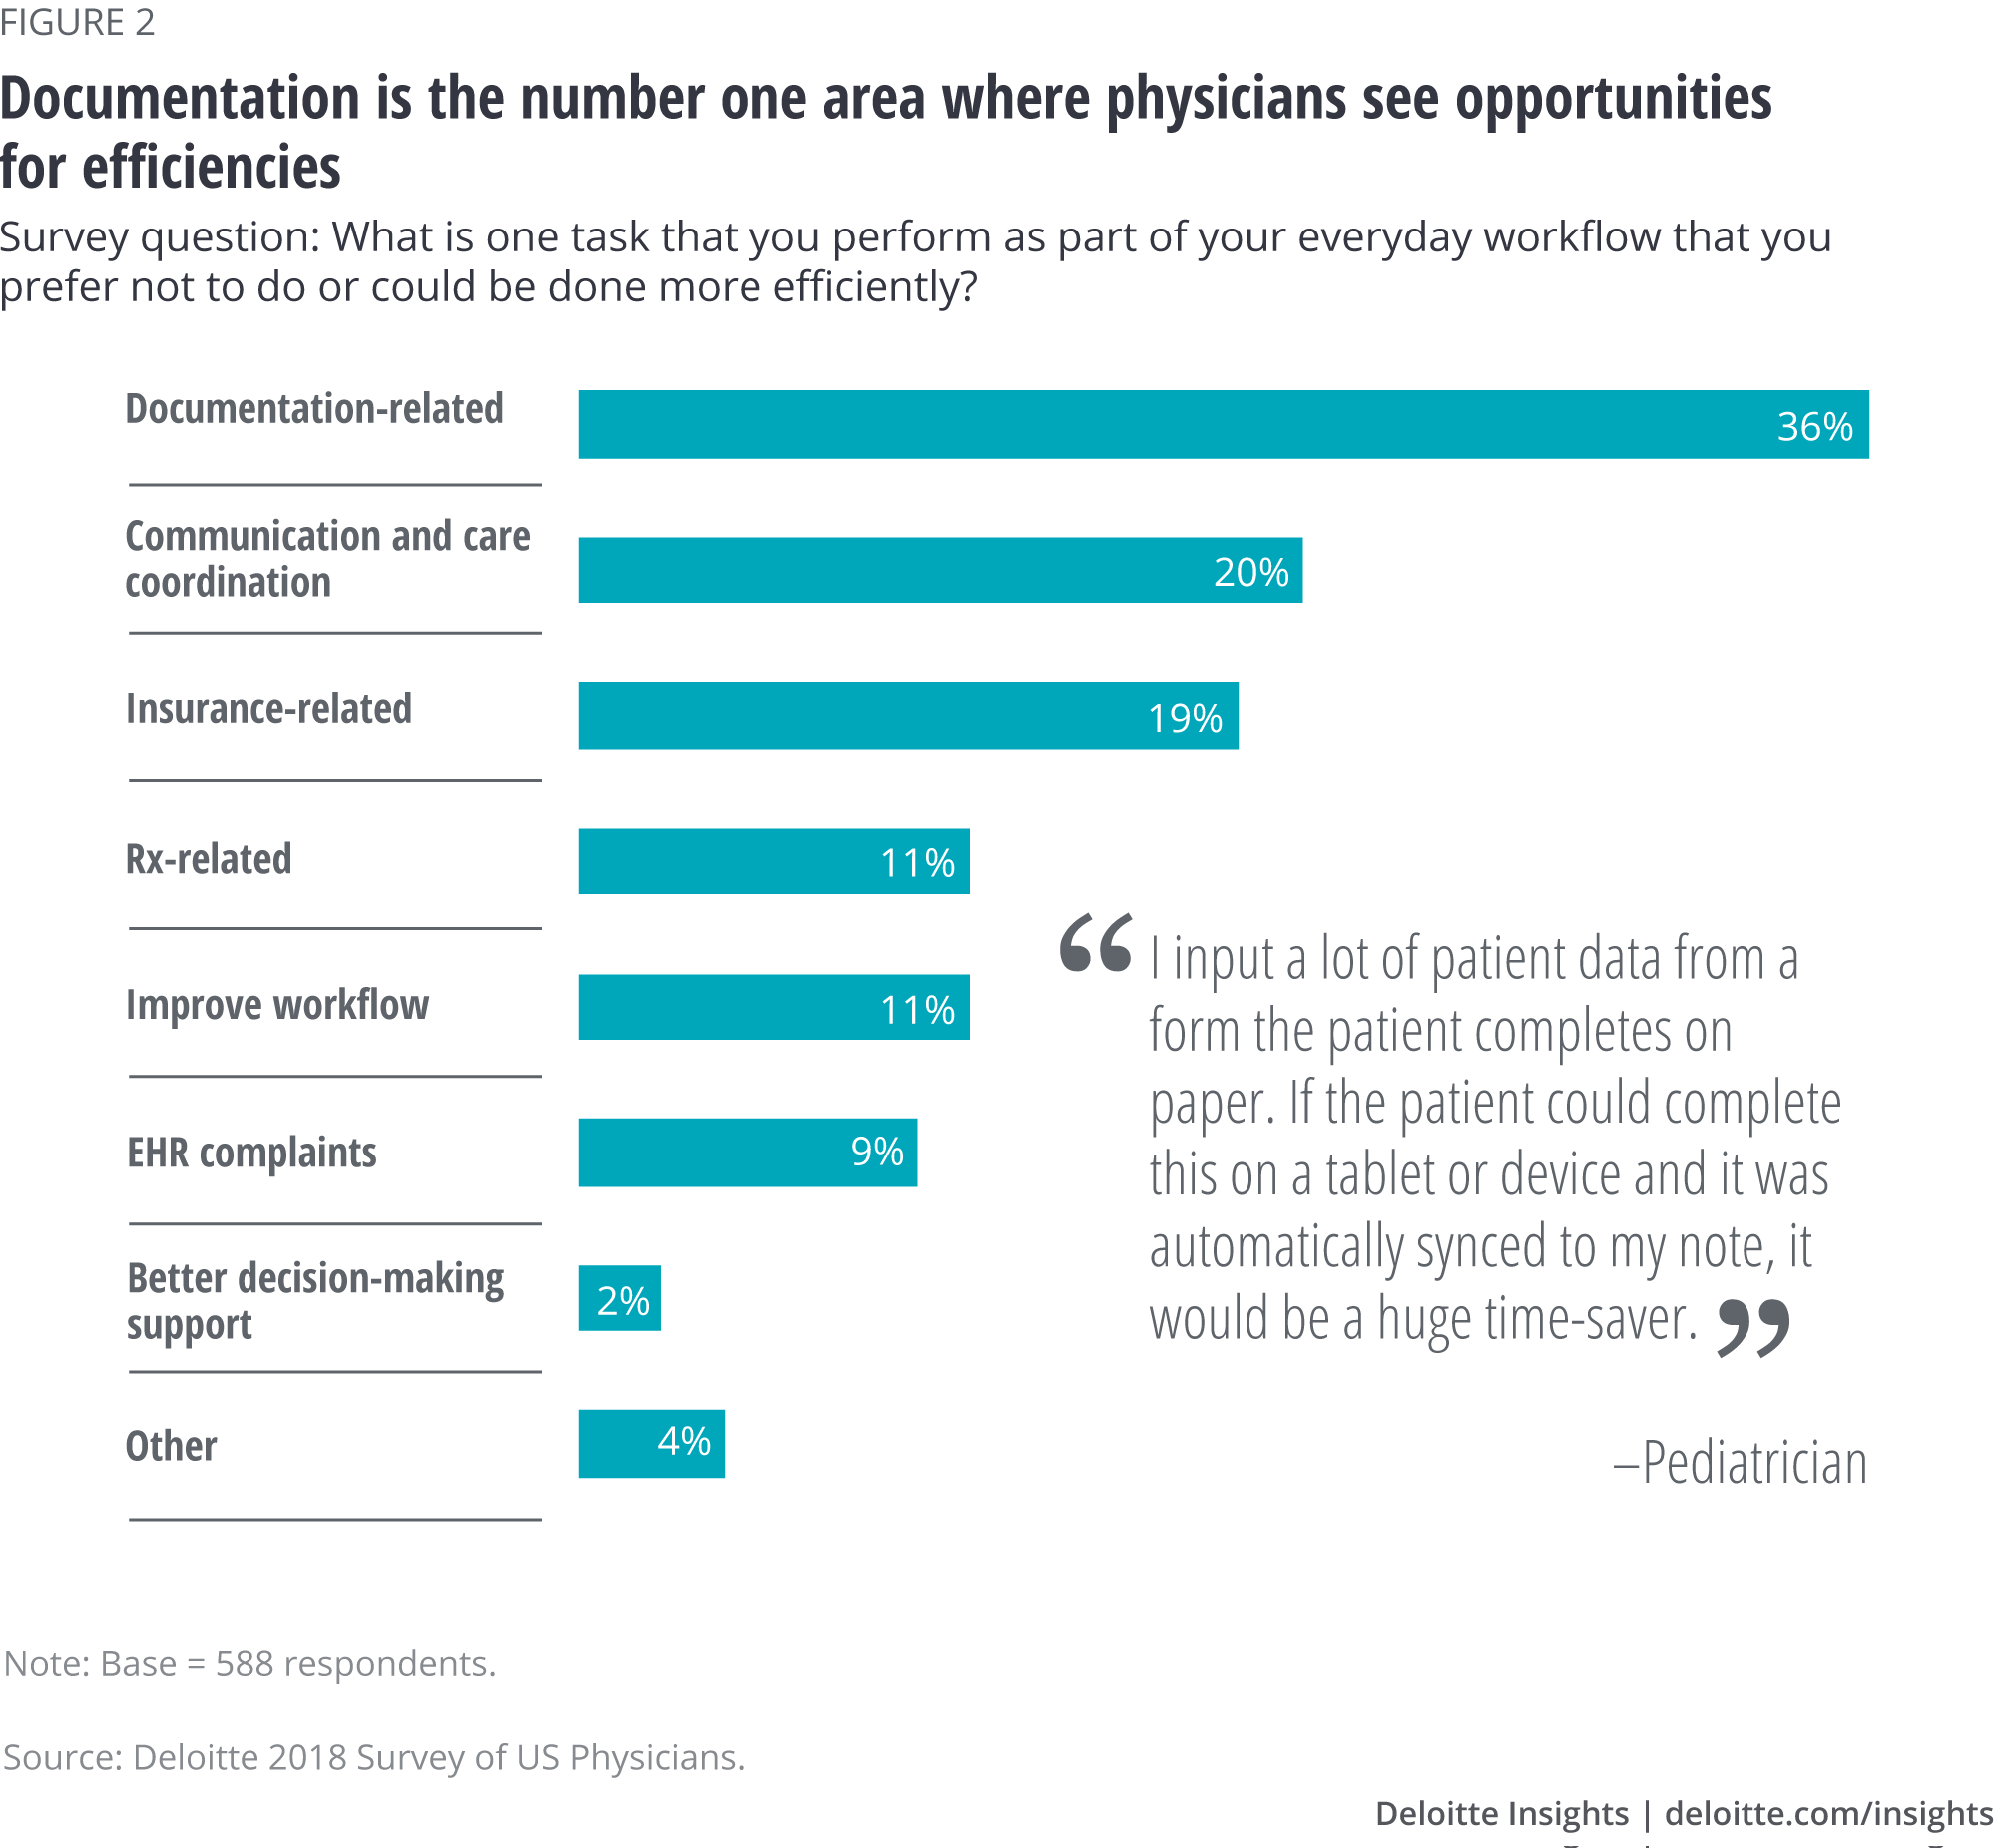 Documentation is the number one area where physicians see opportunities for efficiencies